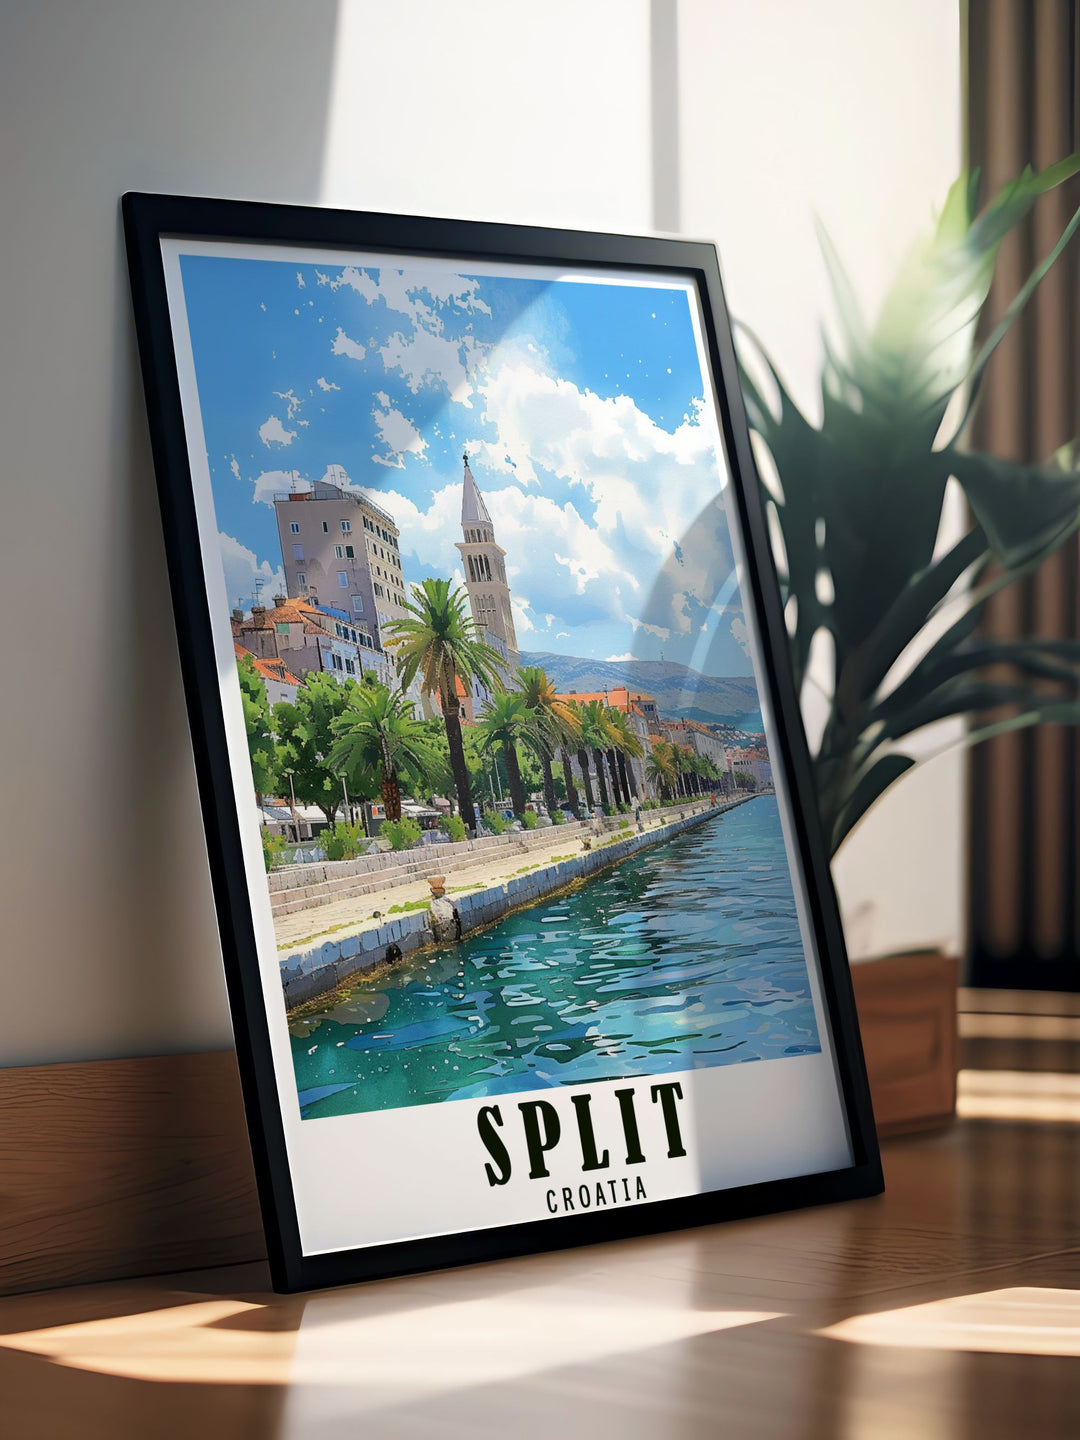 This poster of Split captures the breathtaking views and rich history of the Riva Promenade, inviting viewers to experience the unique charm and adventure of Croatia.